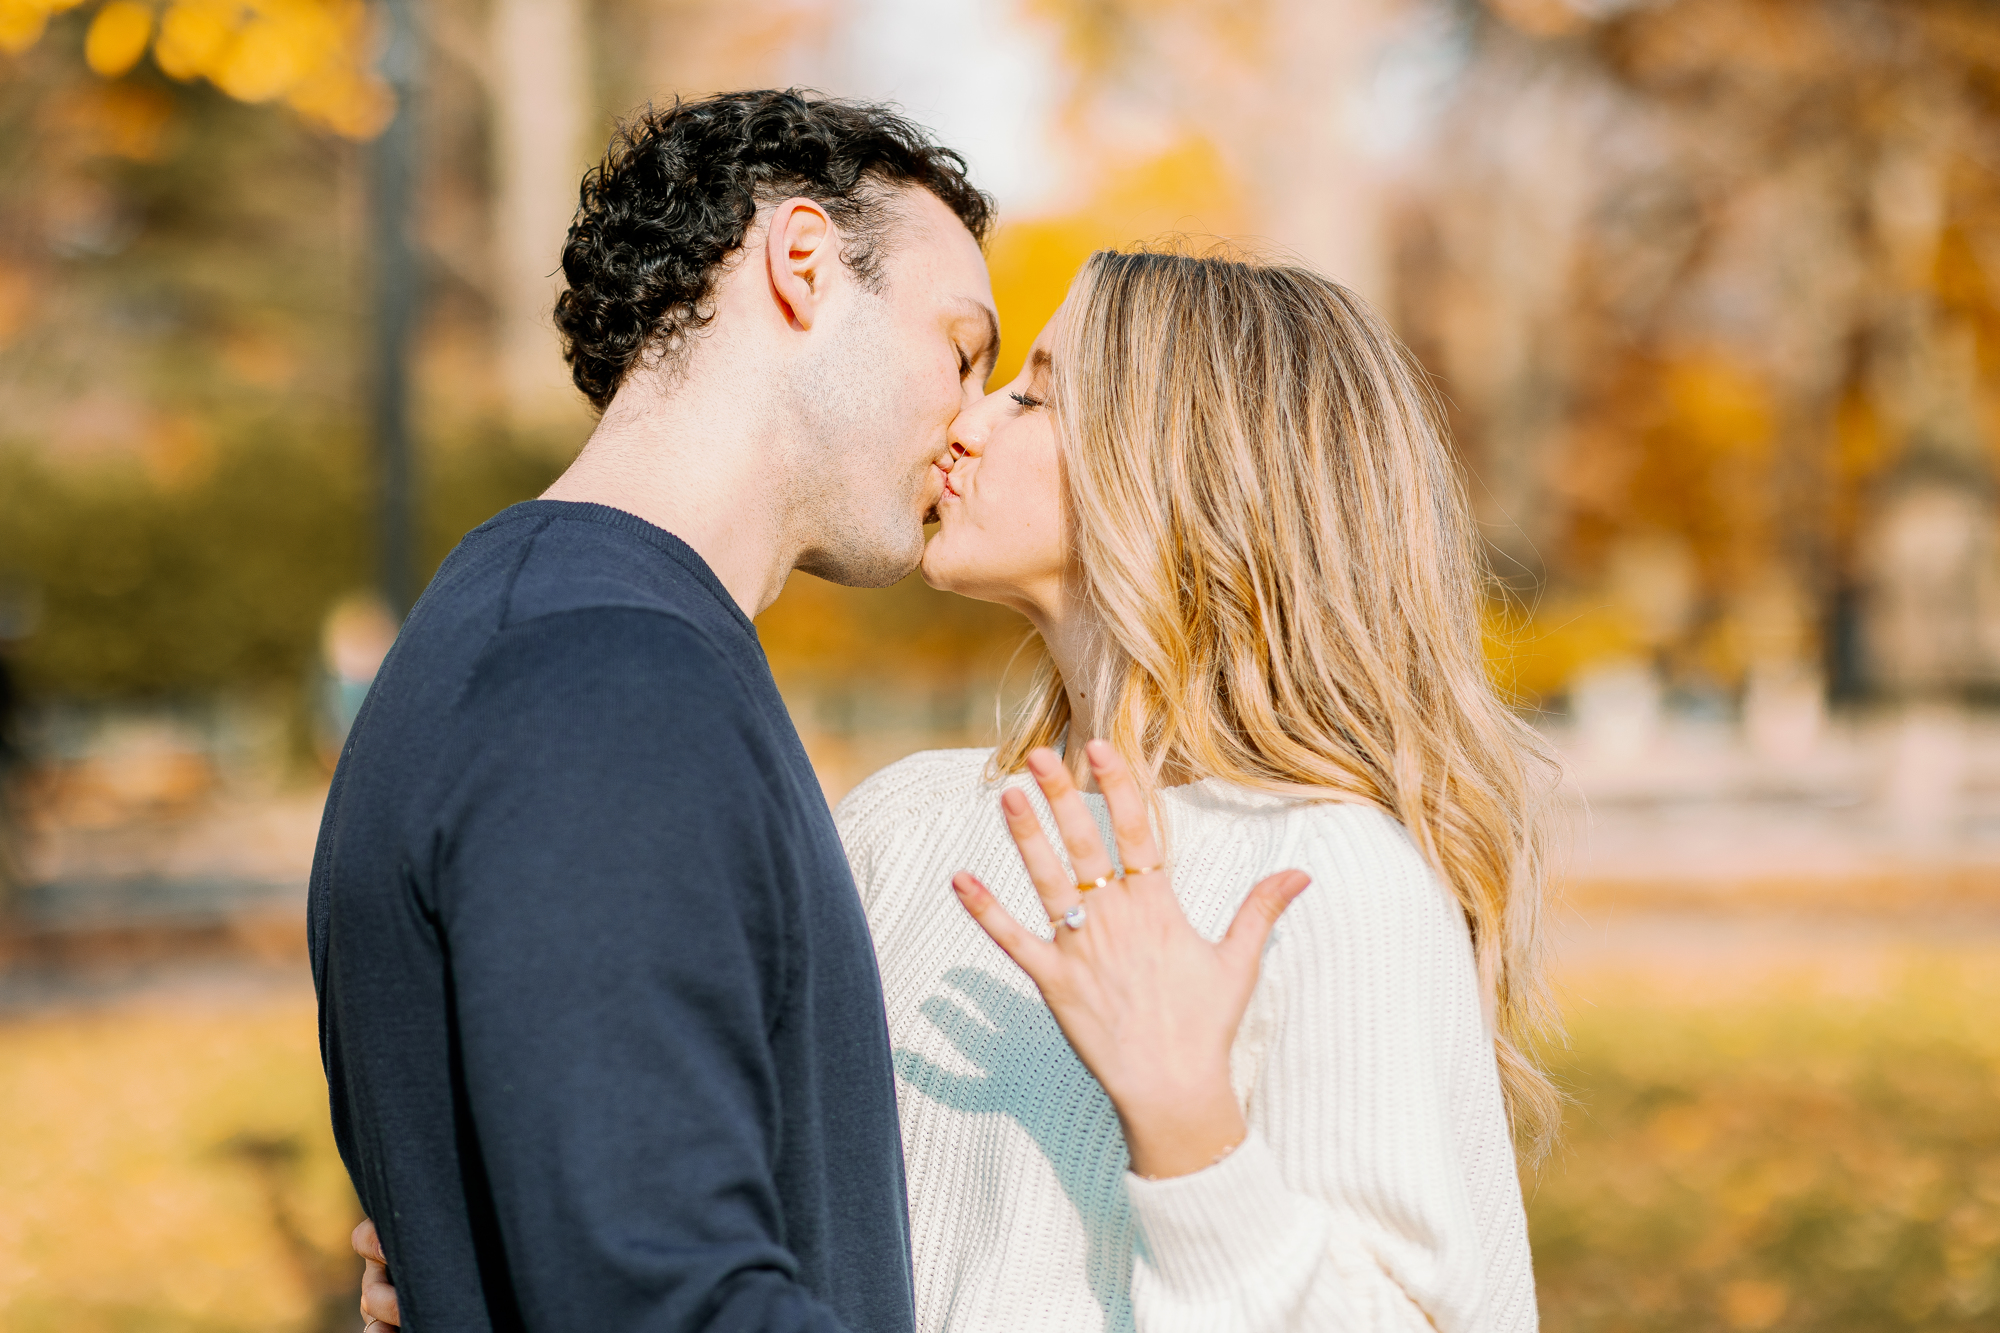 Fall engagement photos in Central Park